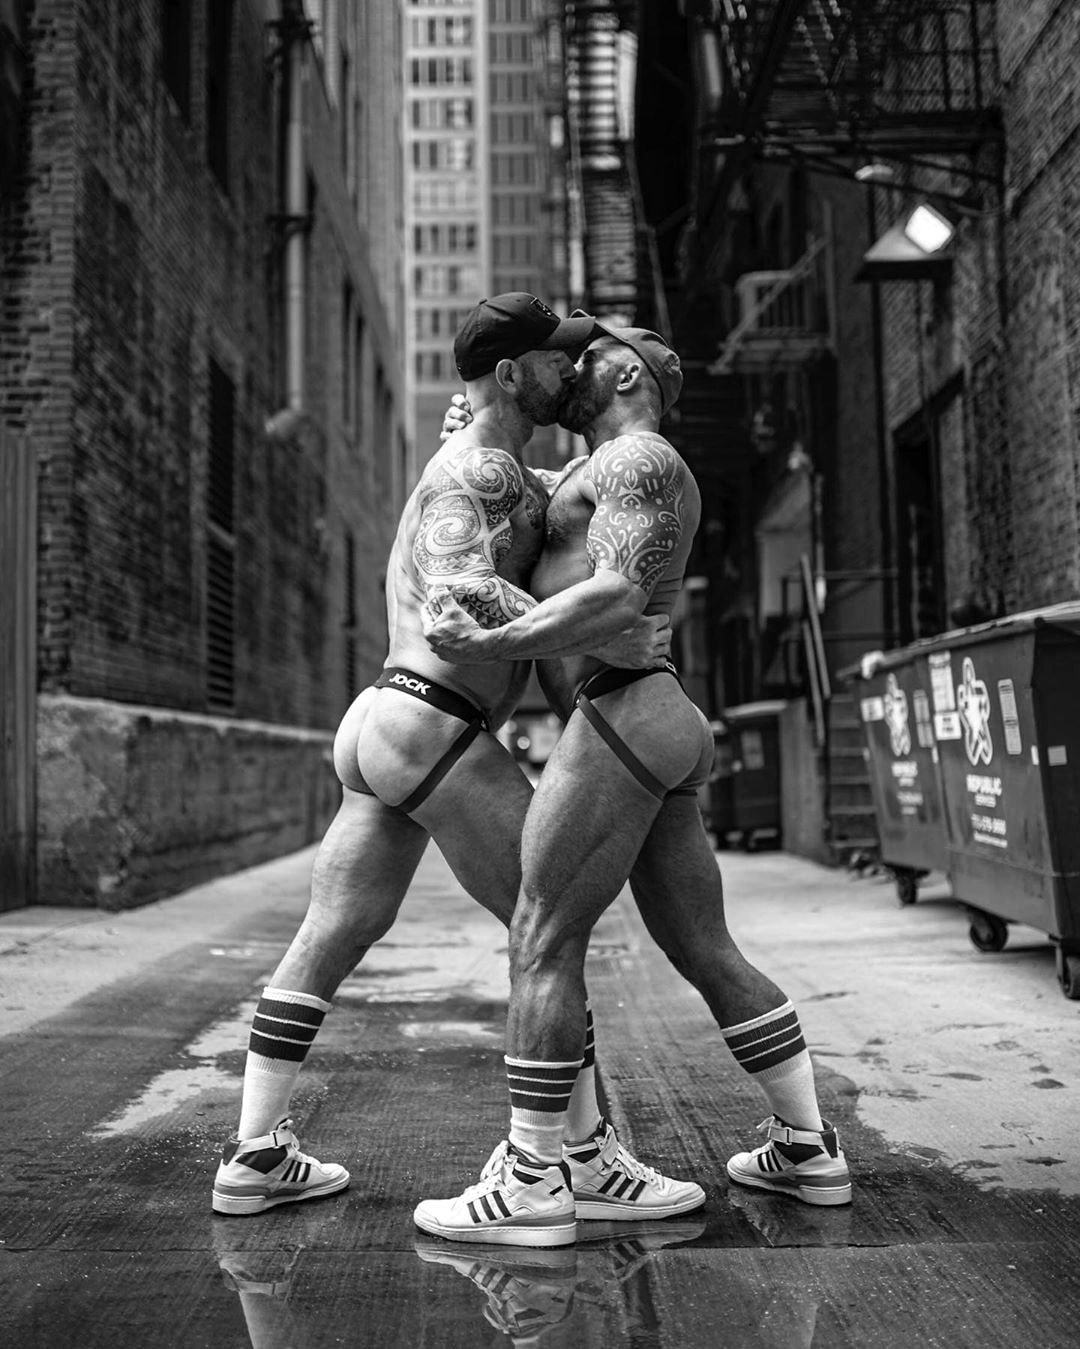 JockS, SockS, hi-TopS, by Chadford for Schuld Photography ft Vic Rocco and Jon Galt.